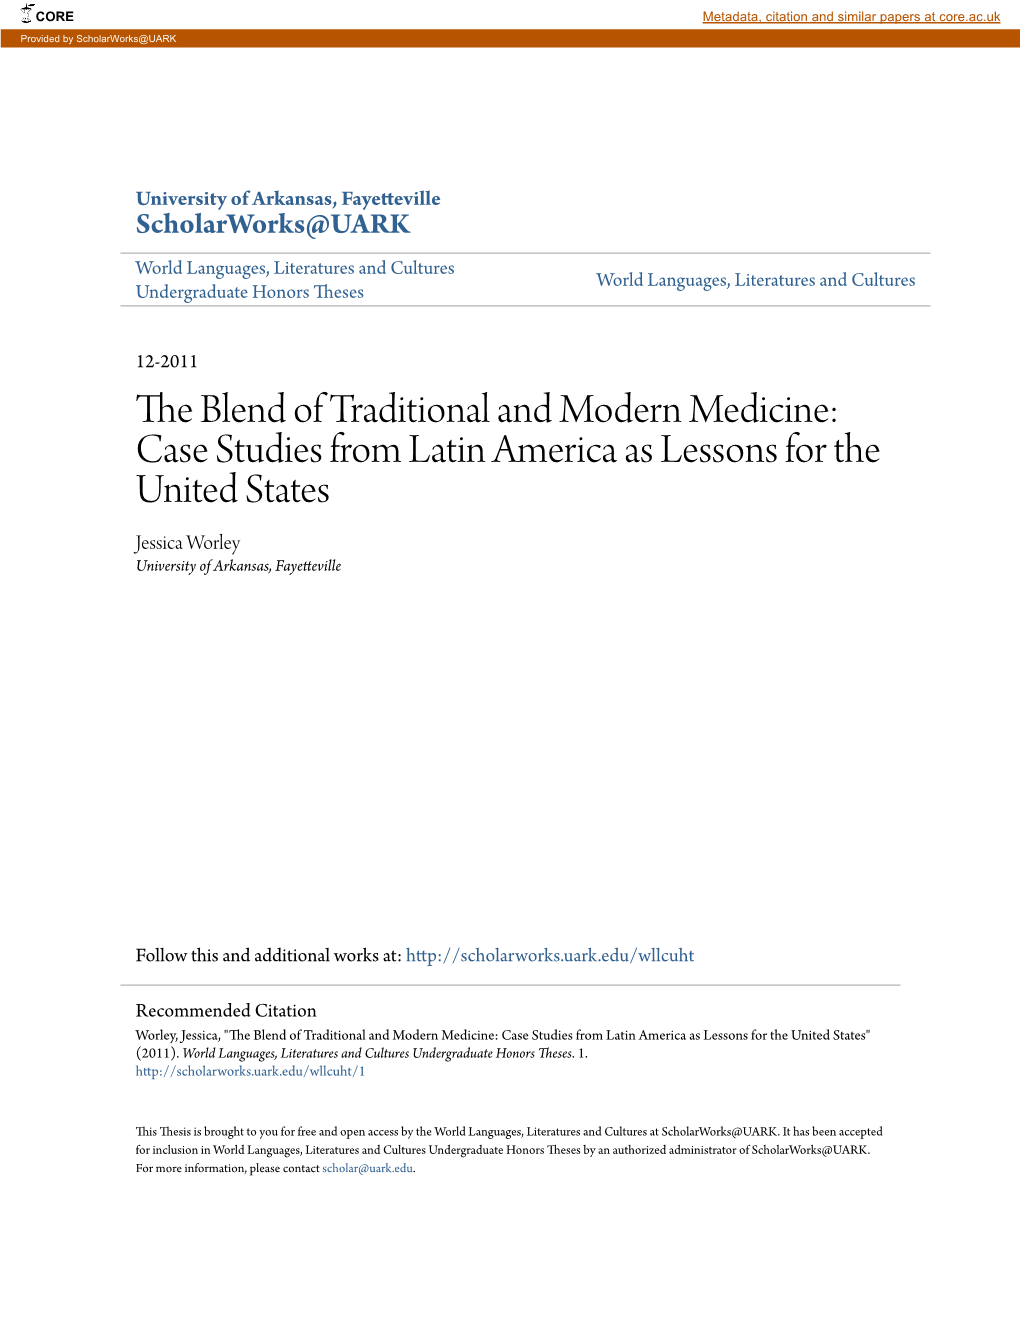 The Blend of Traditional and Modern Medicine: Case Studies from Latin America As Lessons for the United States